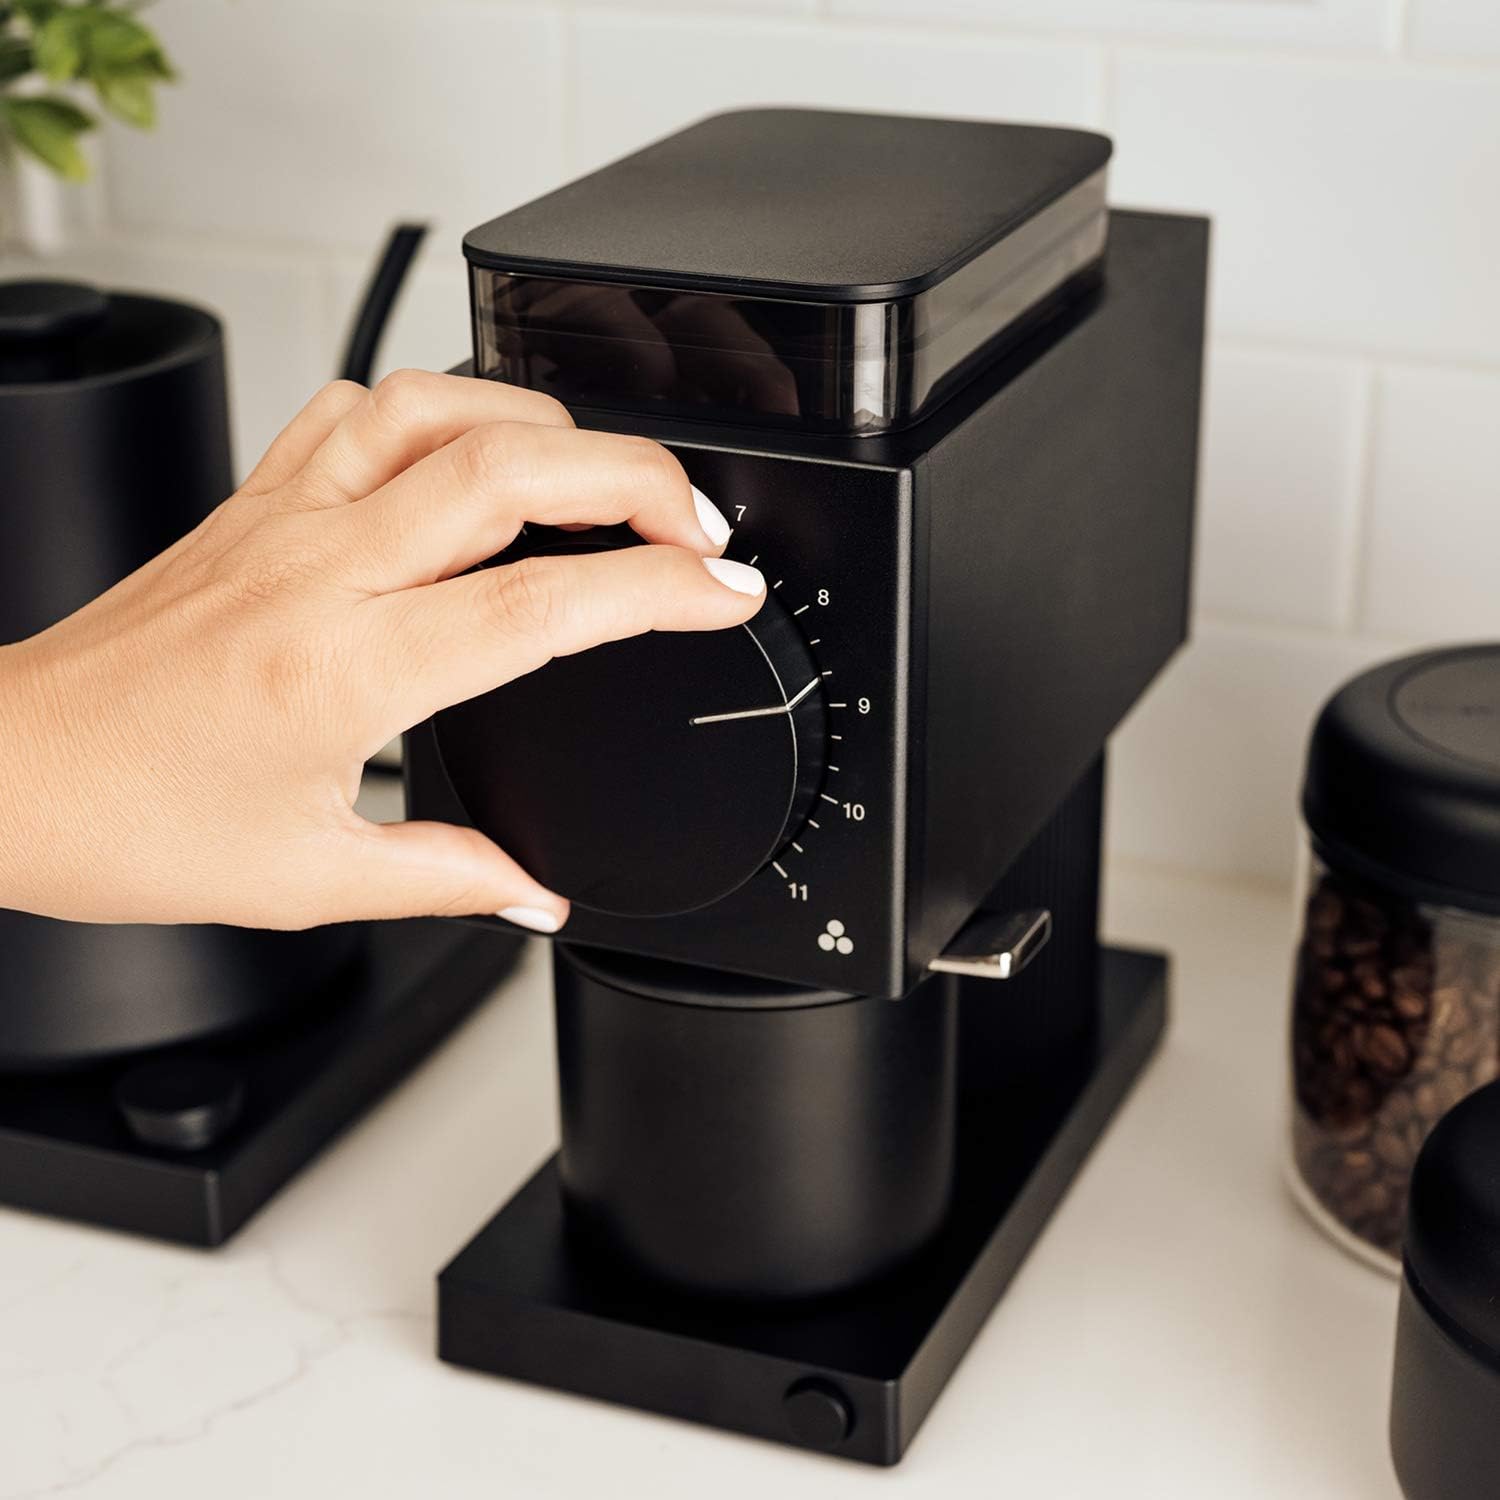 https://bigbigmart.com/wp-content/uploads/2023/10/Fellow-Ode-Brew-Grinder-Burr-Coffee-Grinder-Electric-Coffee-Bean-Grinder-with-31-Settings-for-Drip-French-Press-Cold-Brew-Small-Footprint-Electric-Grinder-Matte-Black5.jpg